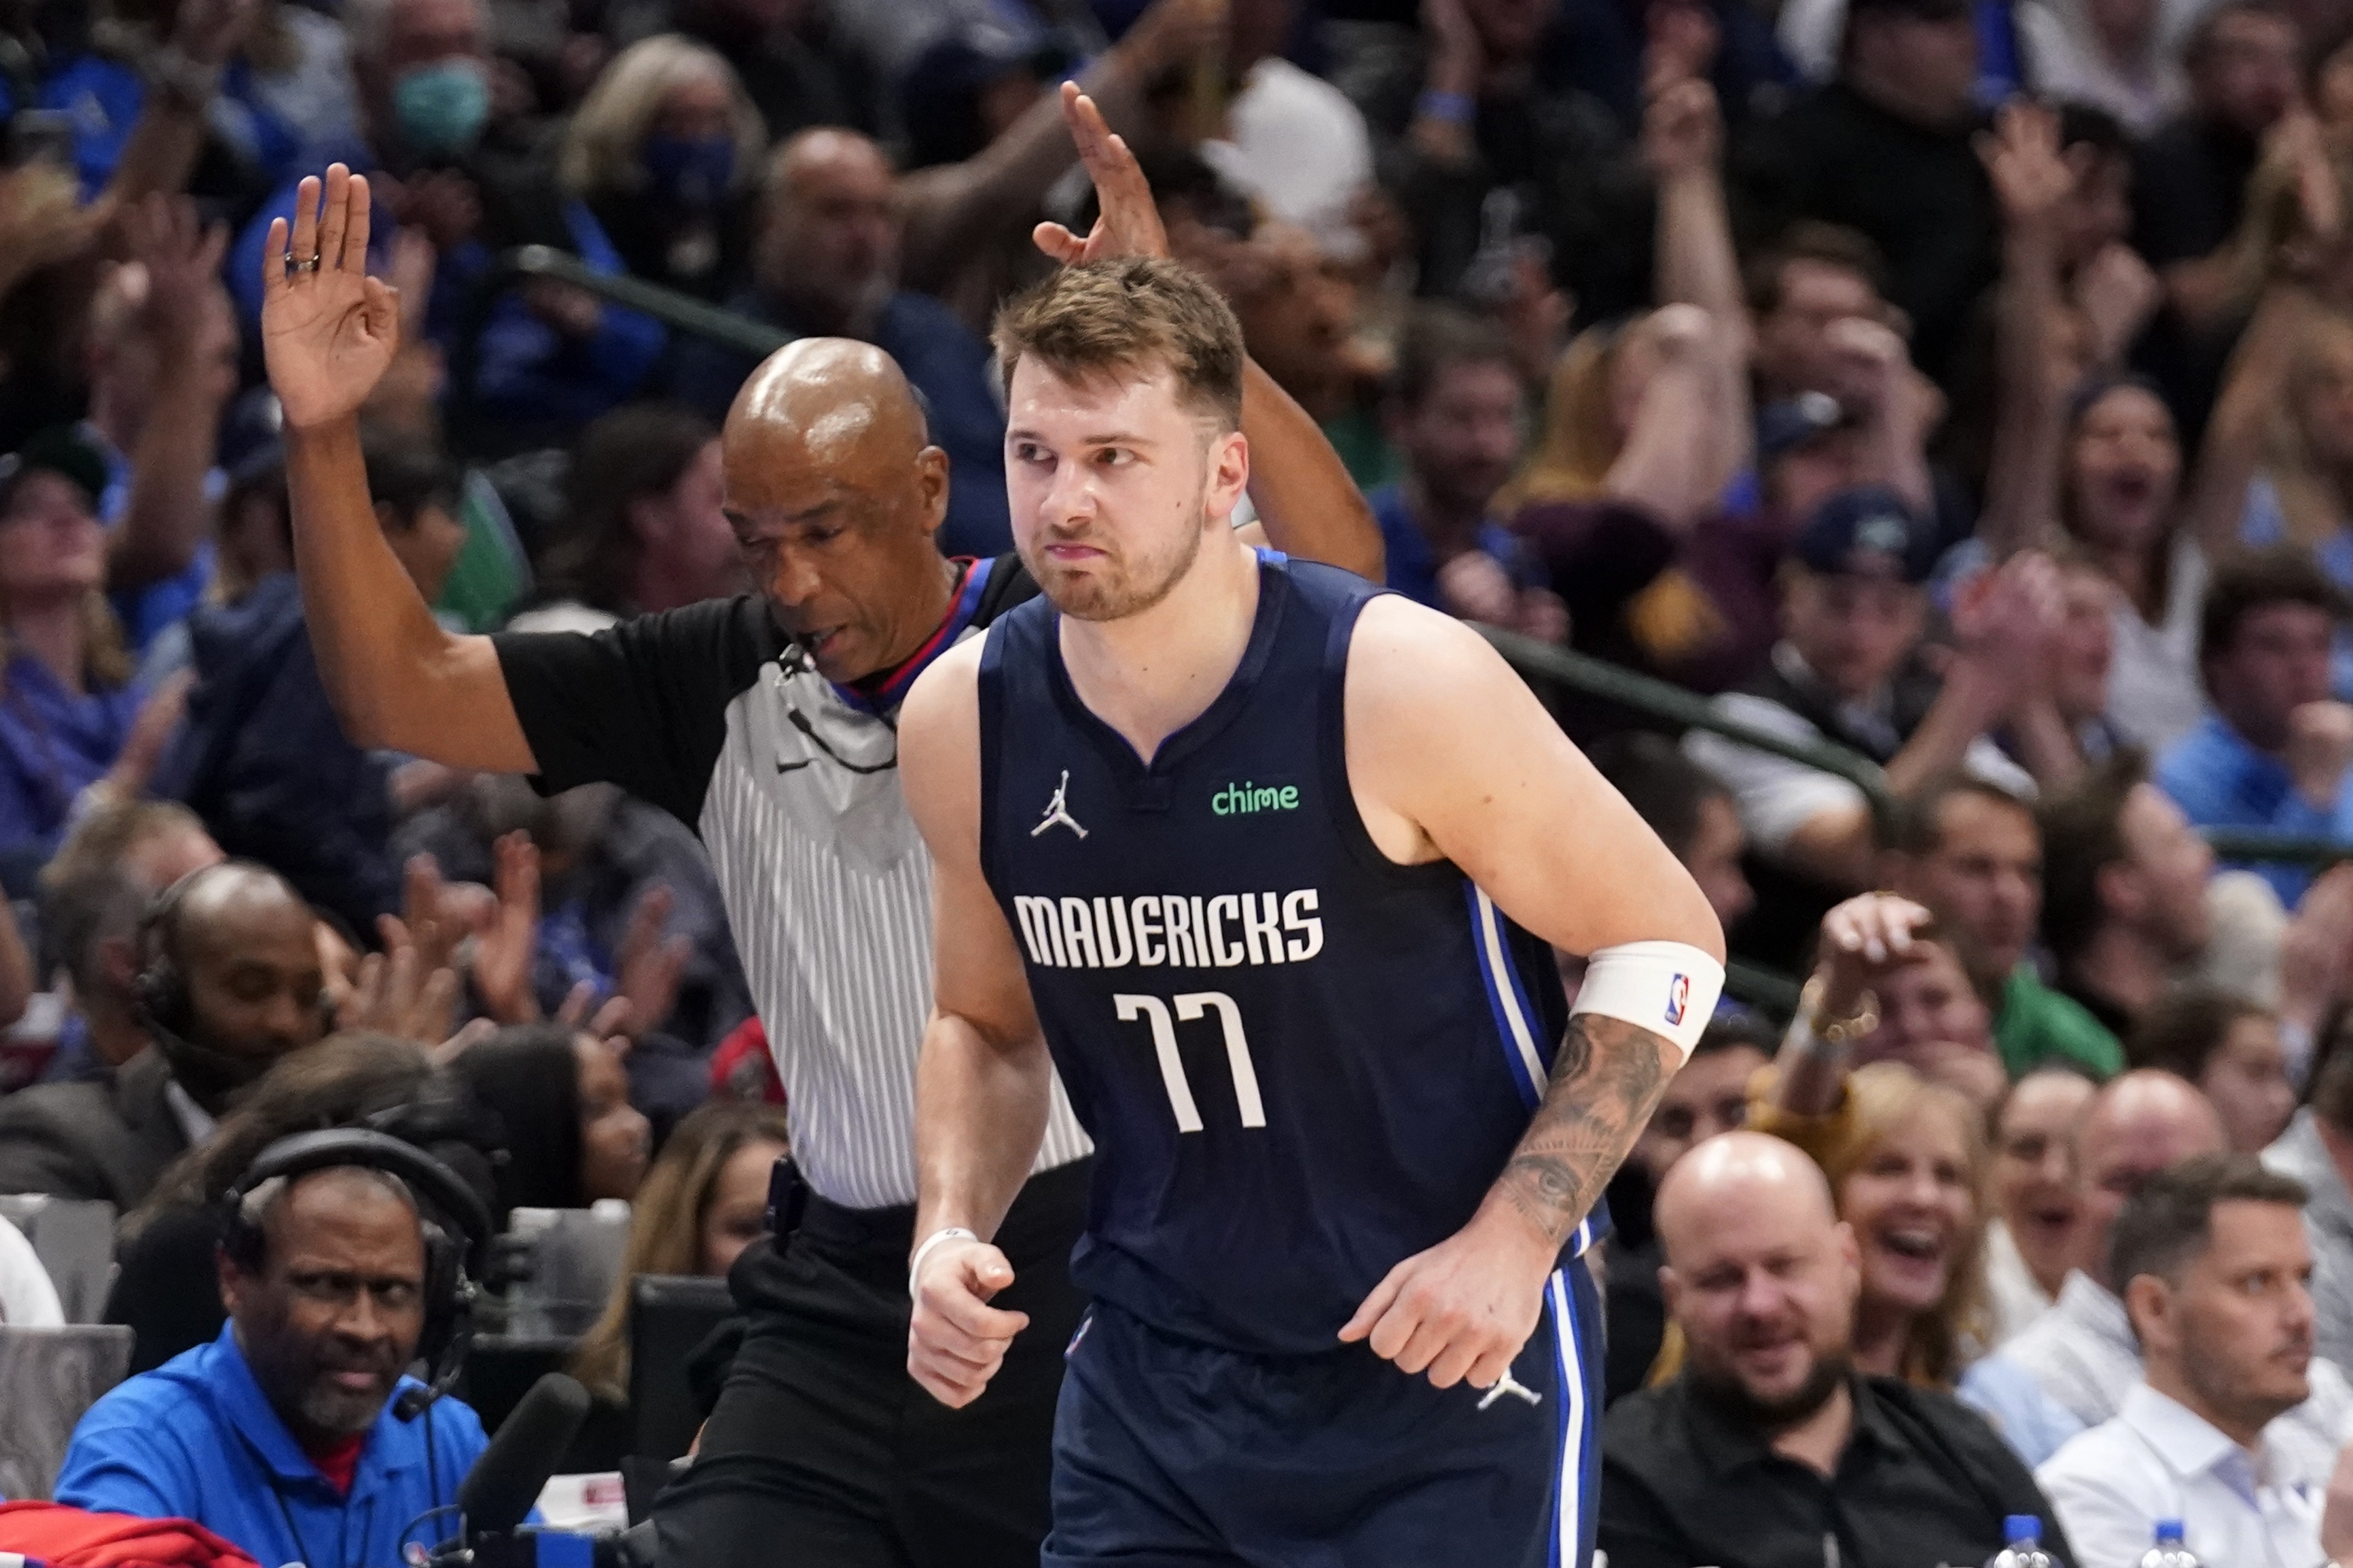 Doncic has 39 points, 11 rebounds, 16th tech in Mavs' win